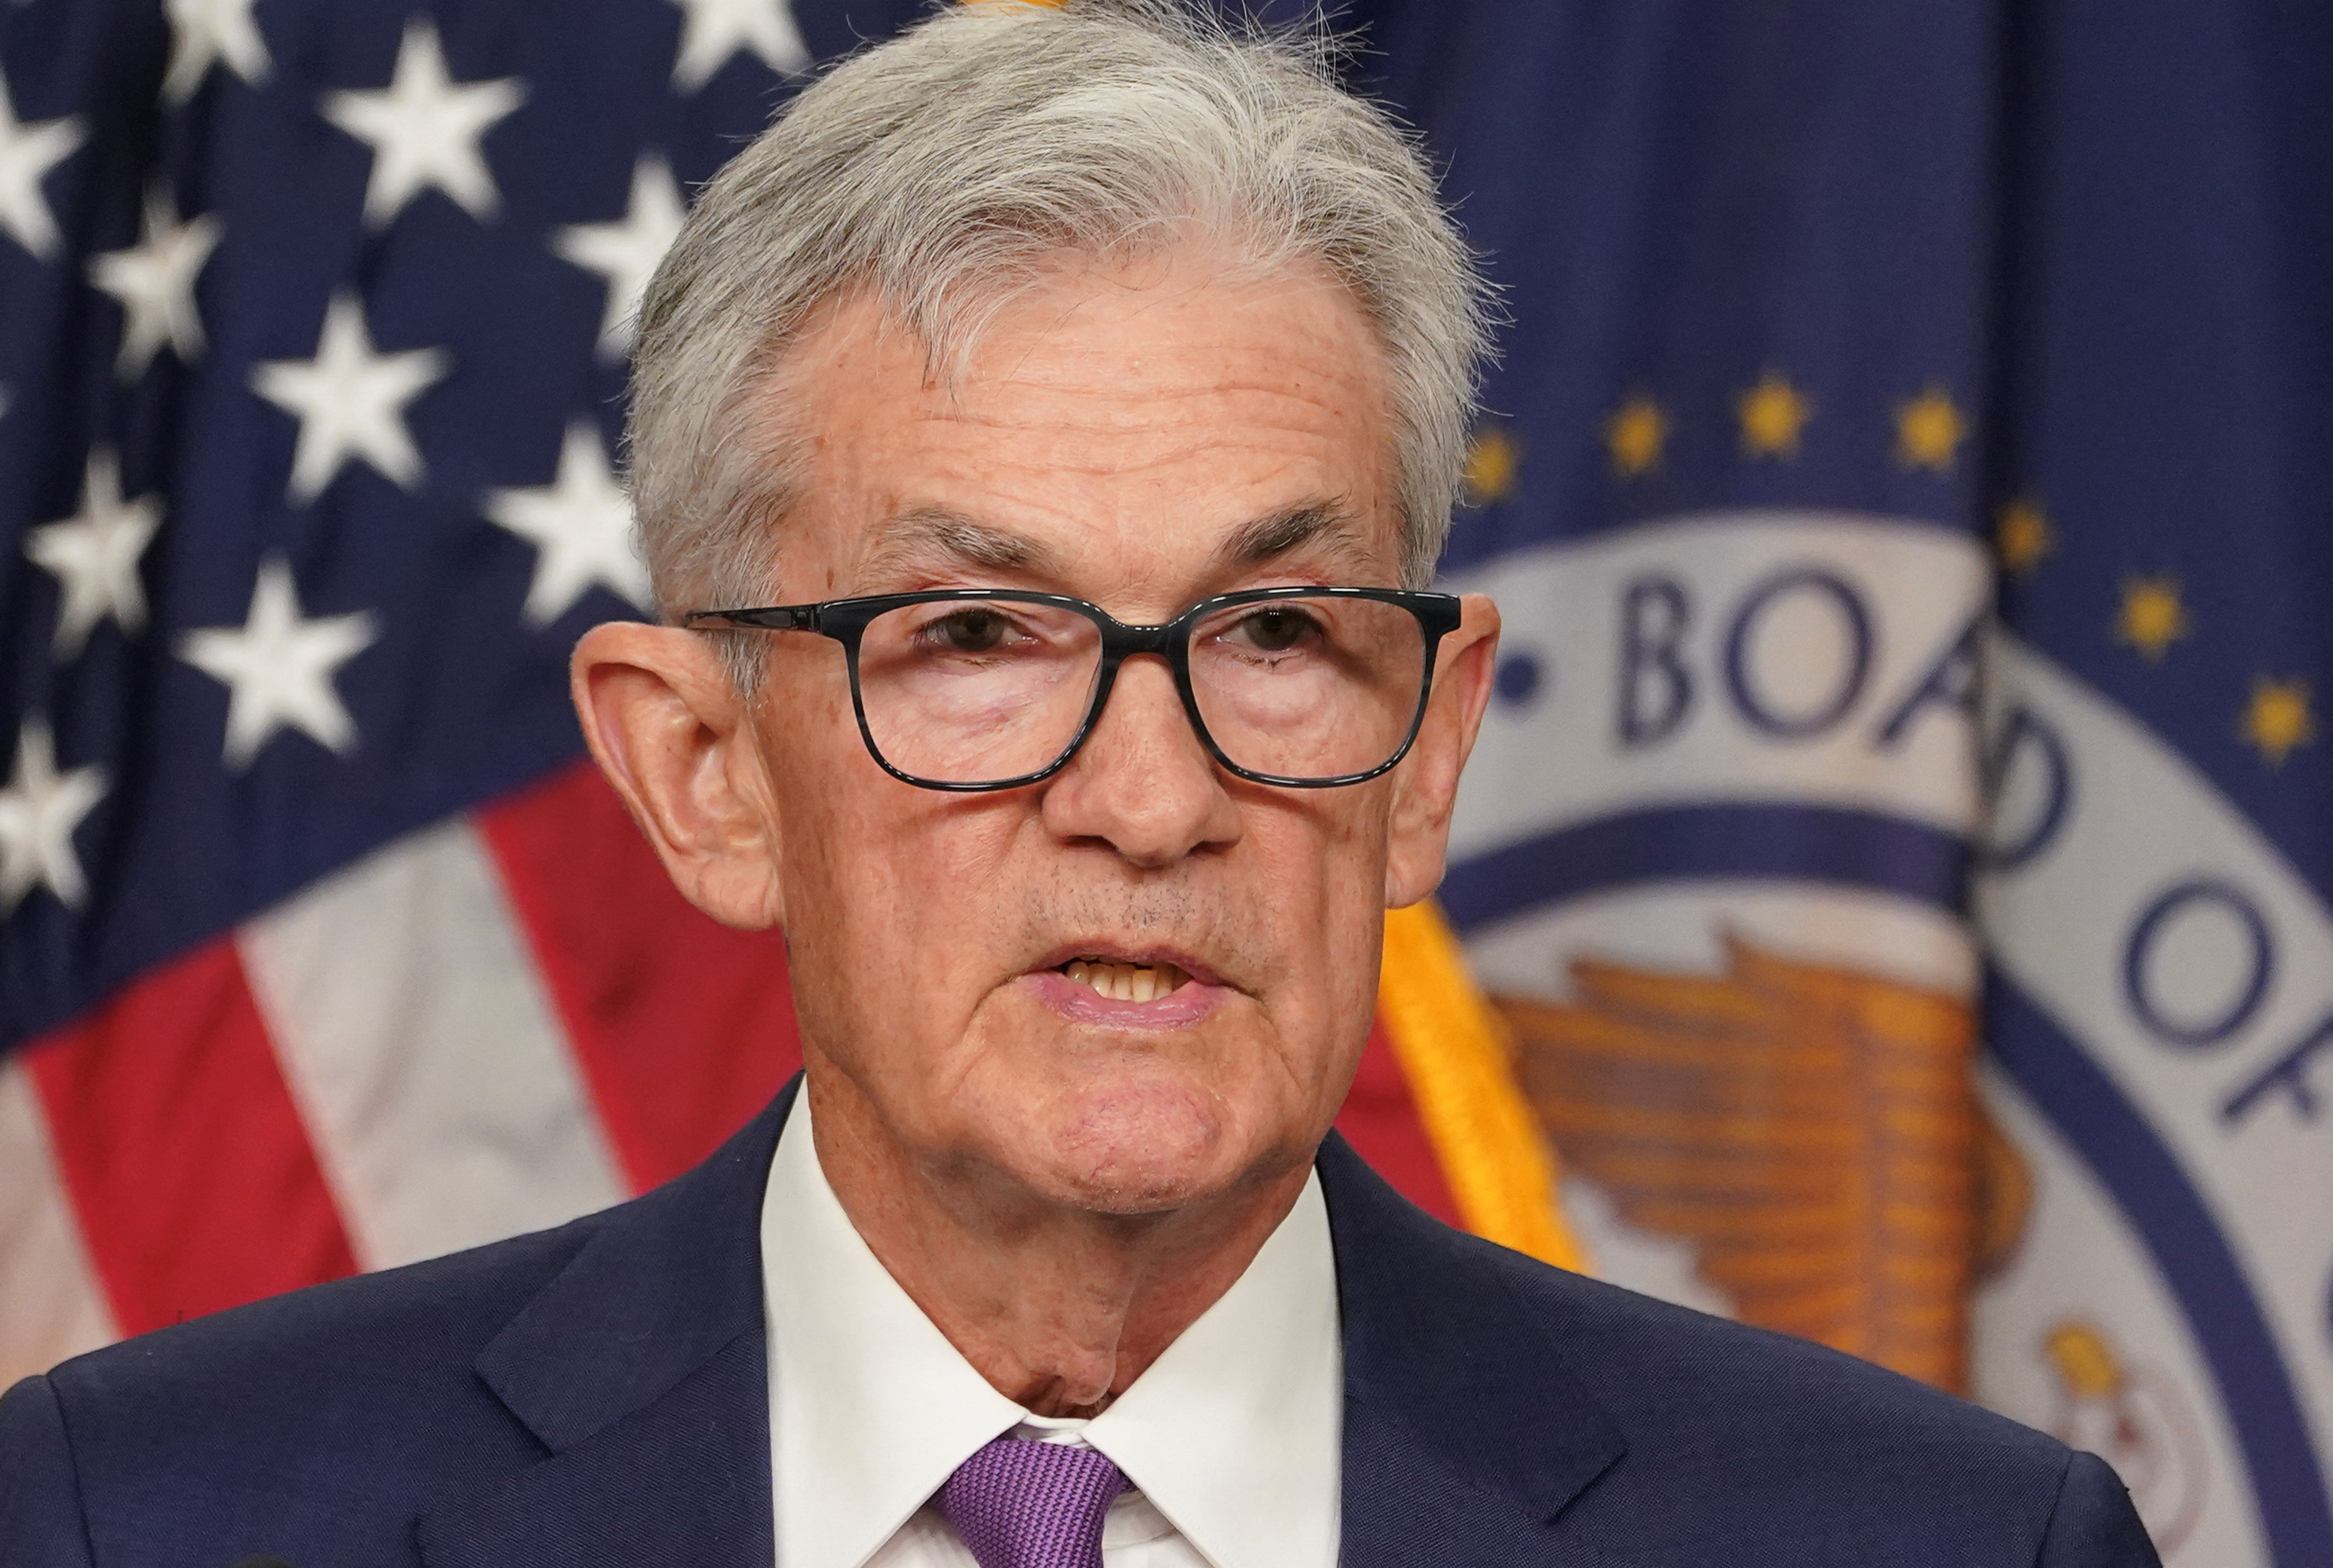 Fed chair Powell speaks at a press conference  in Washington